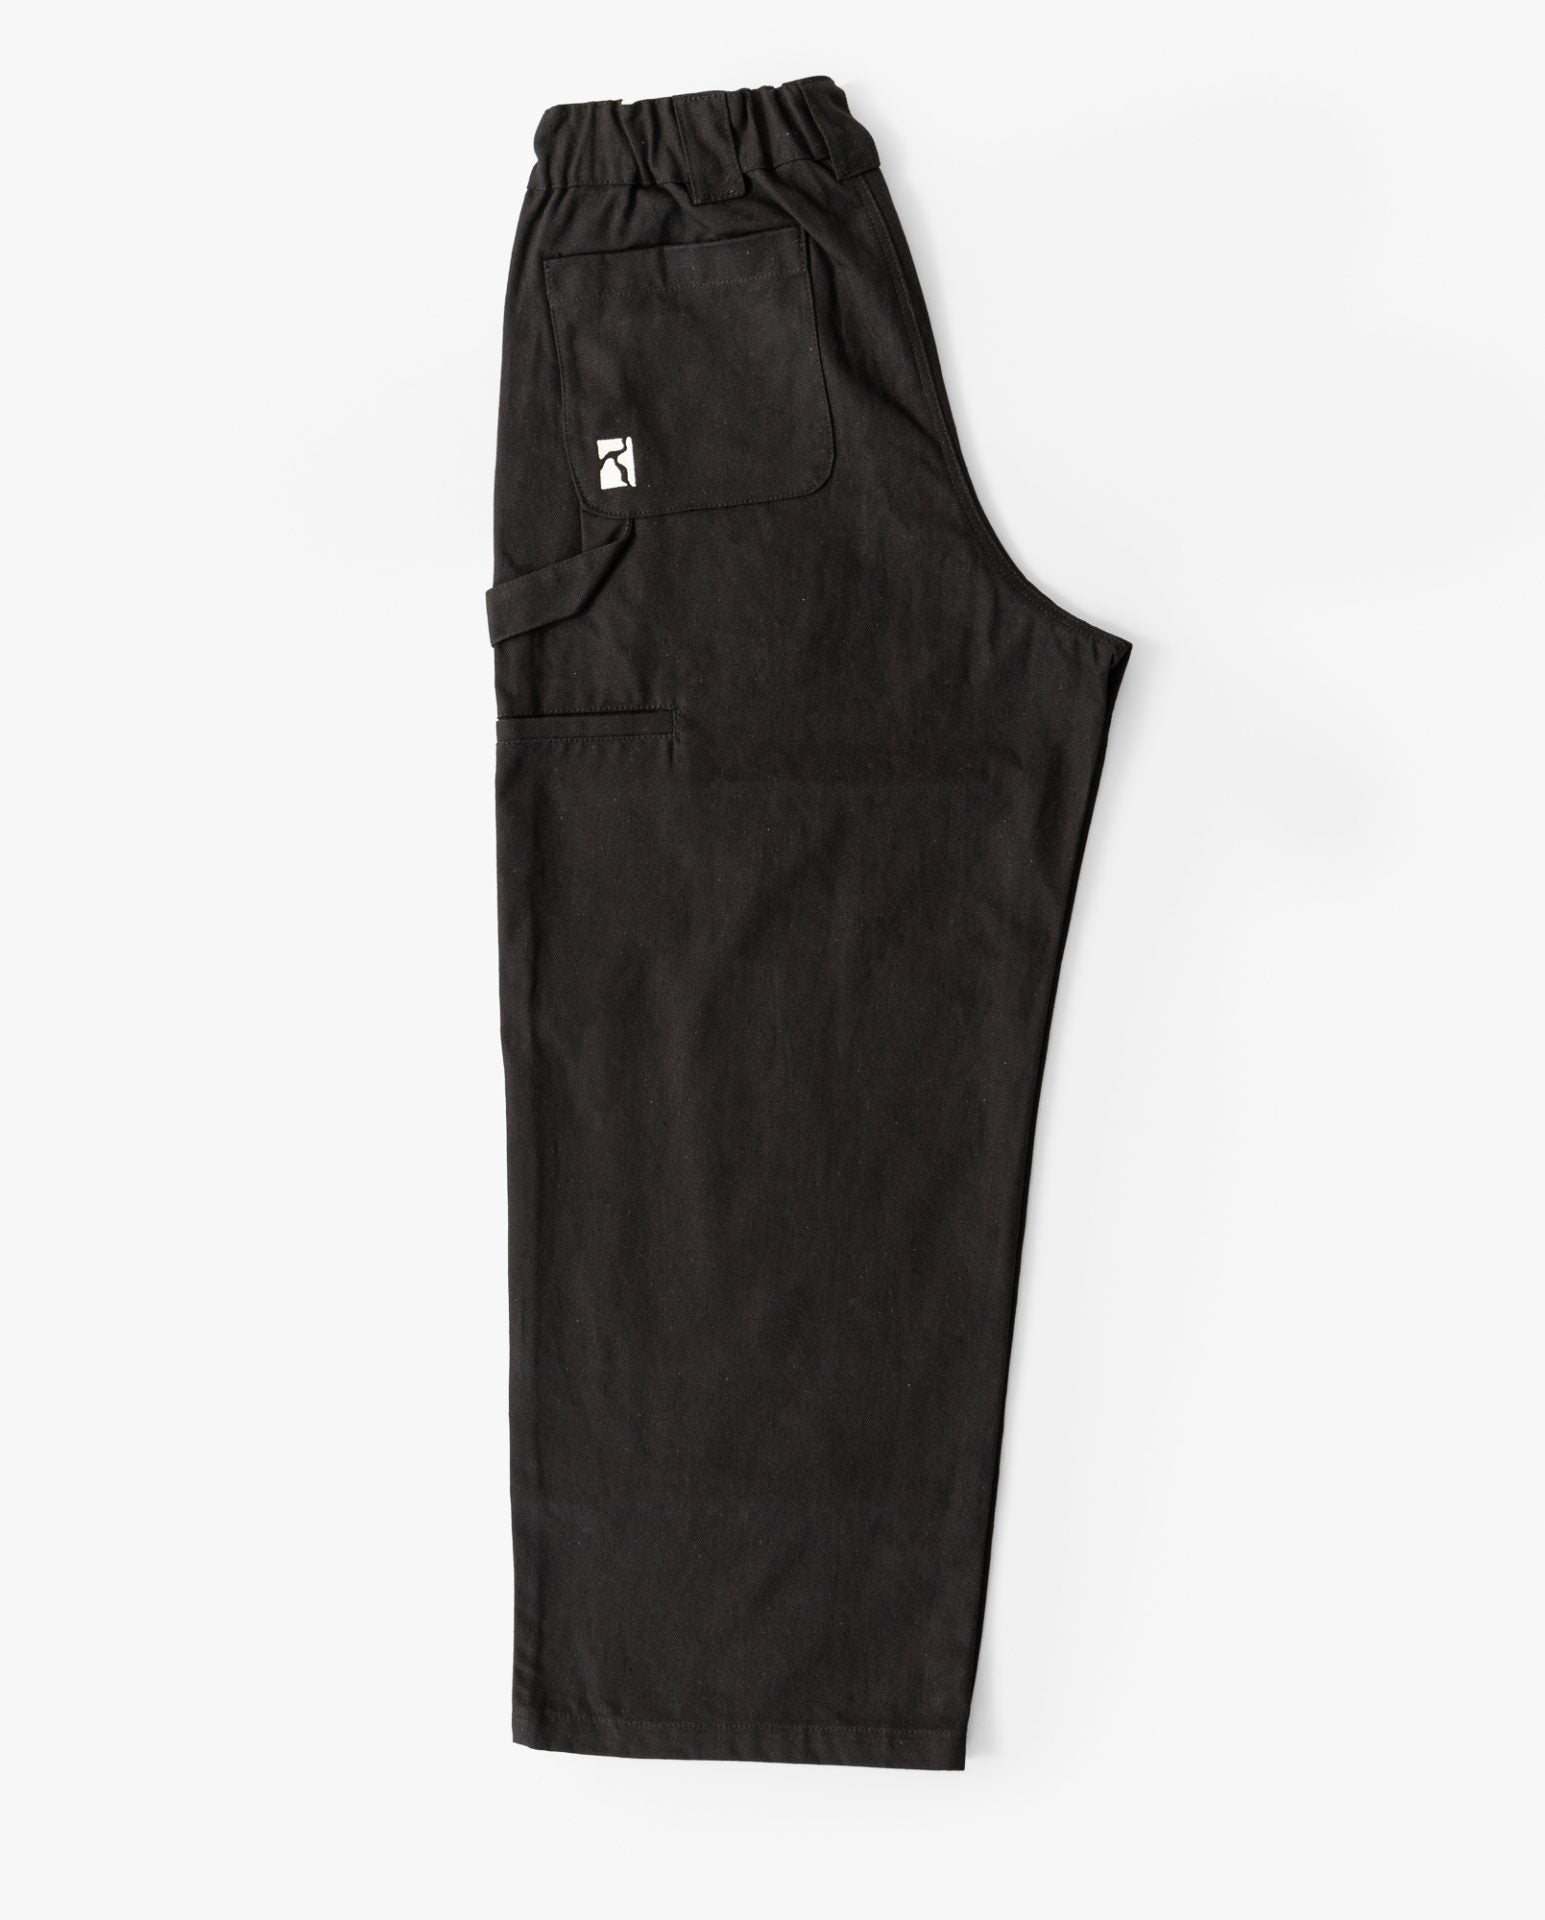 Poetic Collective Sculptor Pants - Olive - Apgs-nswShops